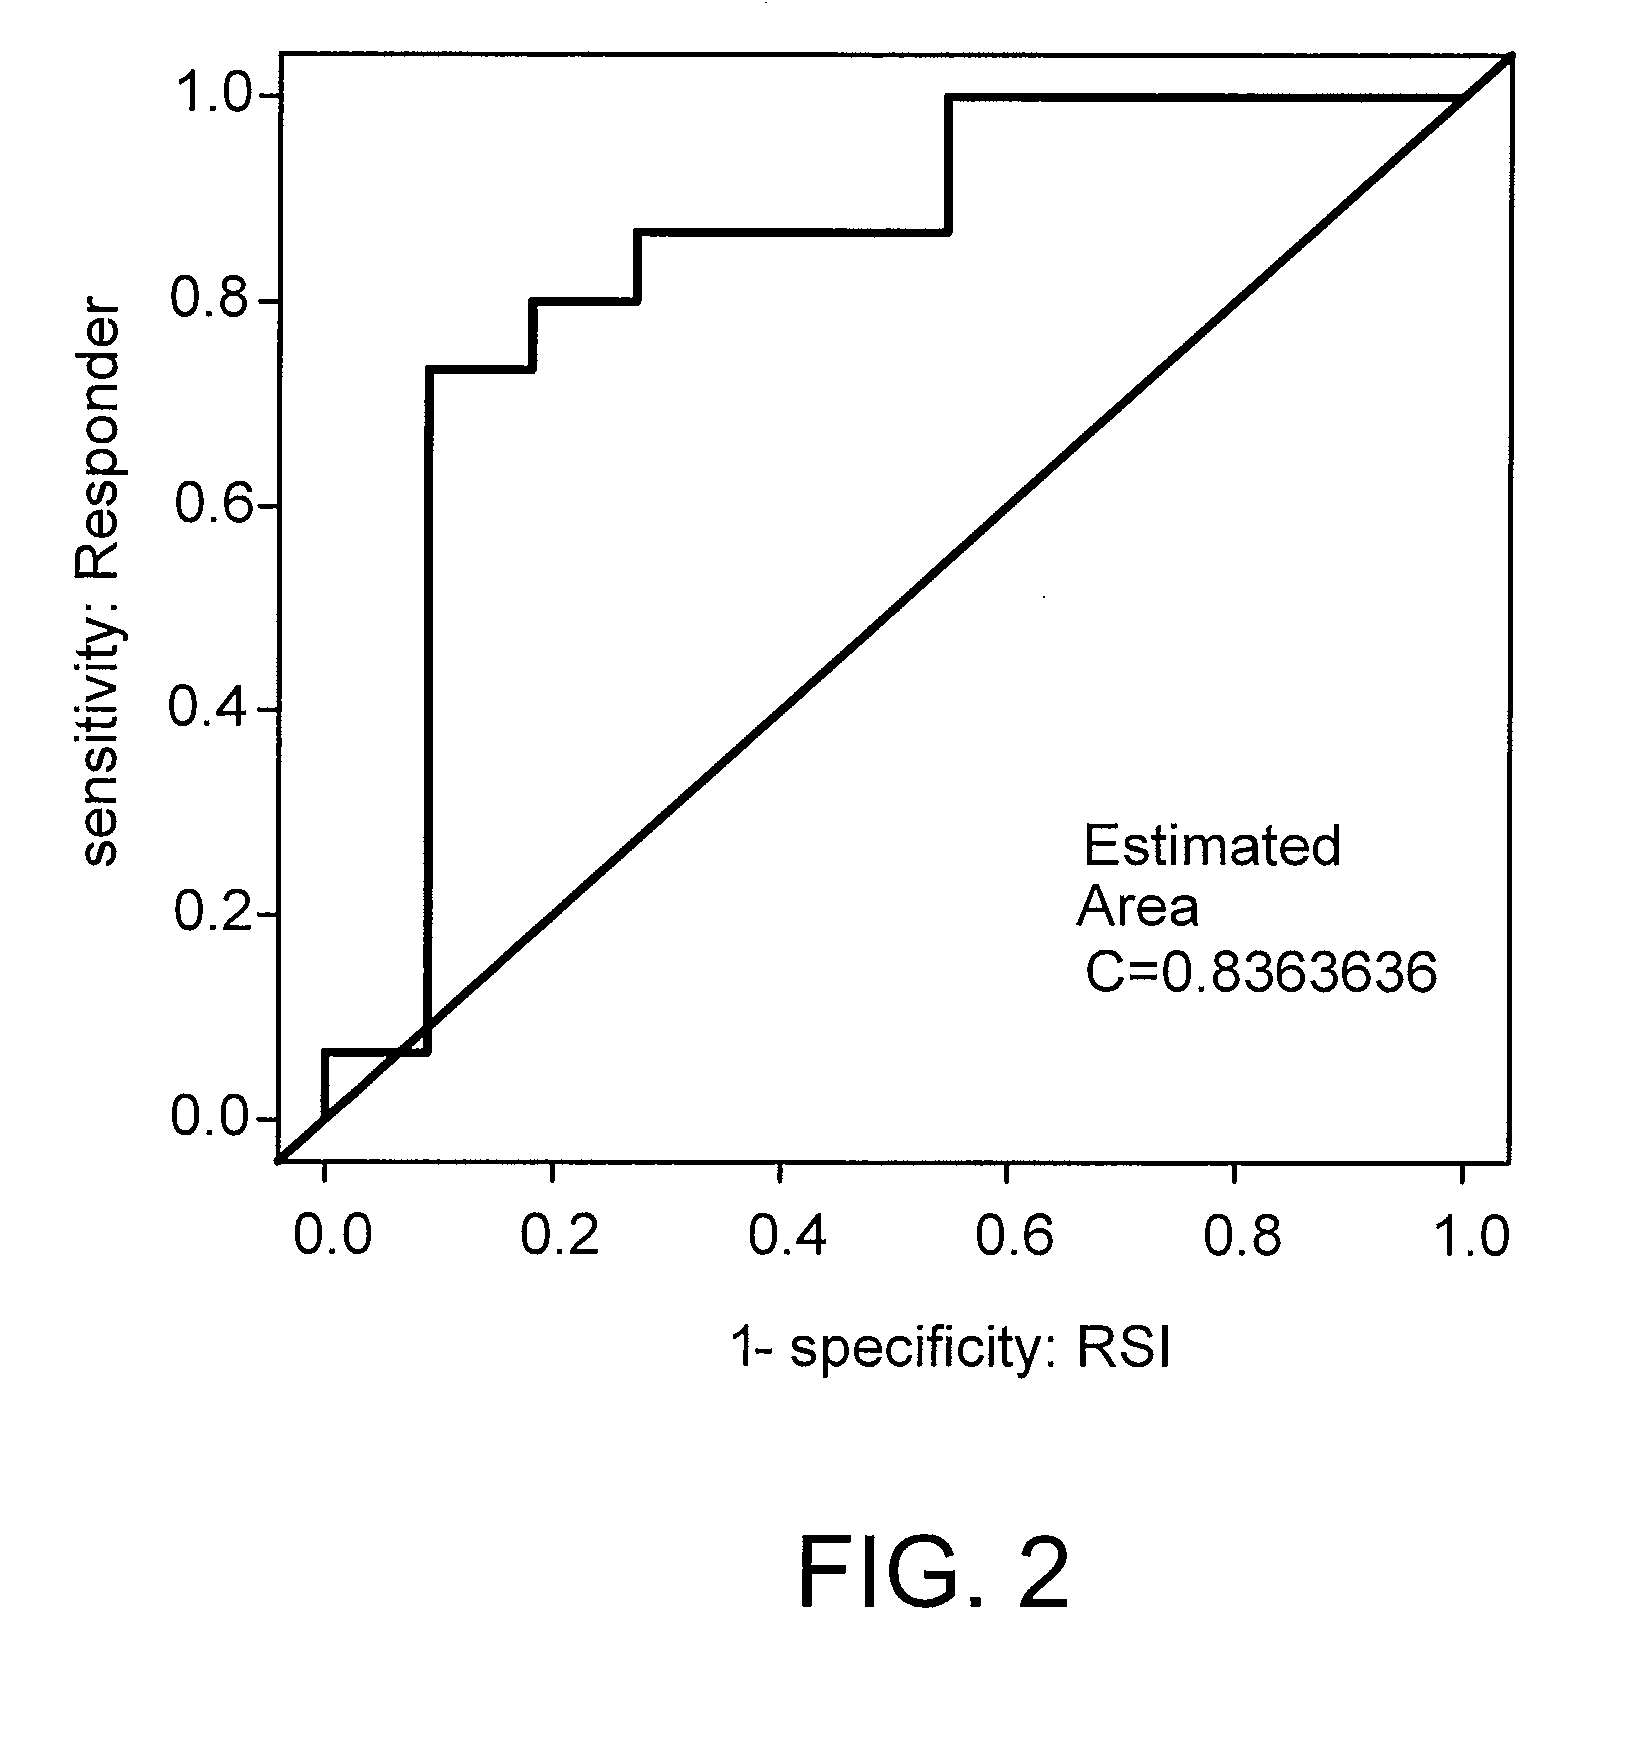 Gene Signature for the Prediction of Radiation Therapy Response